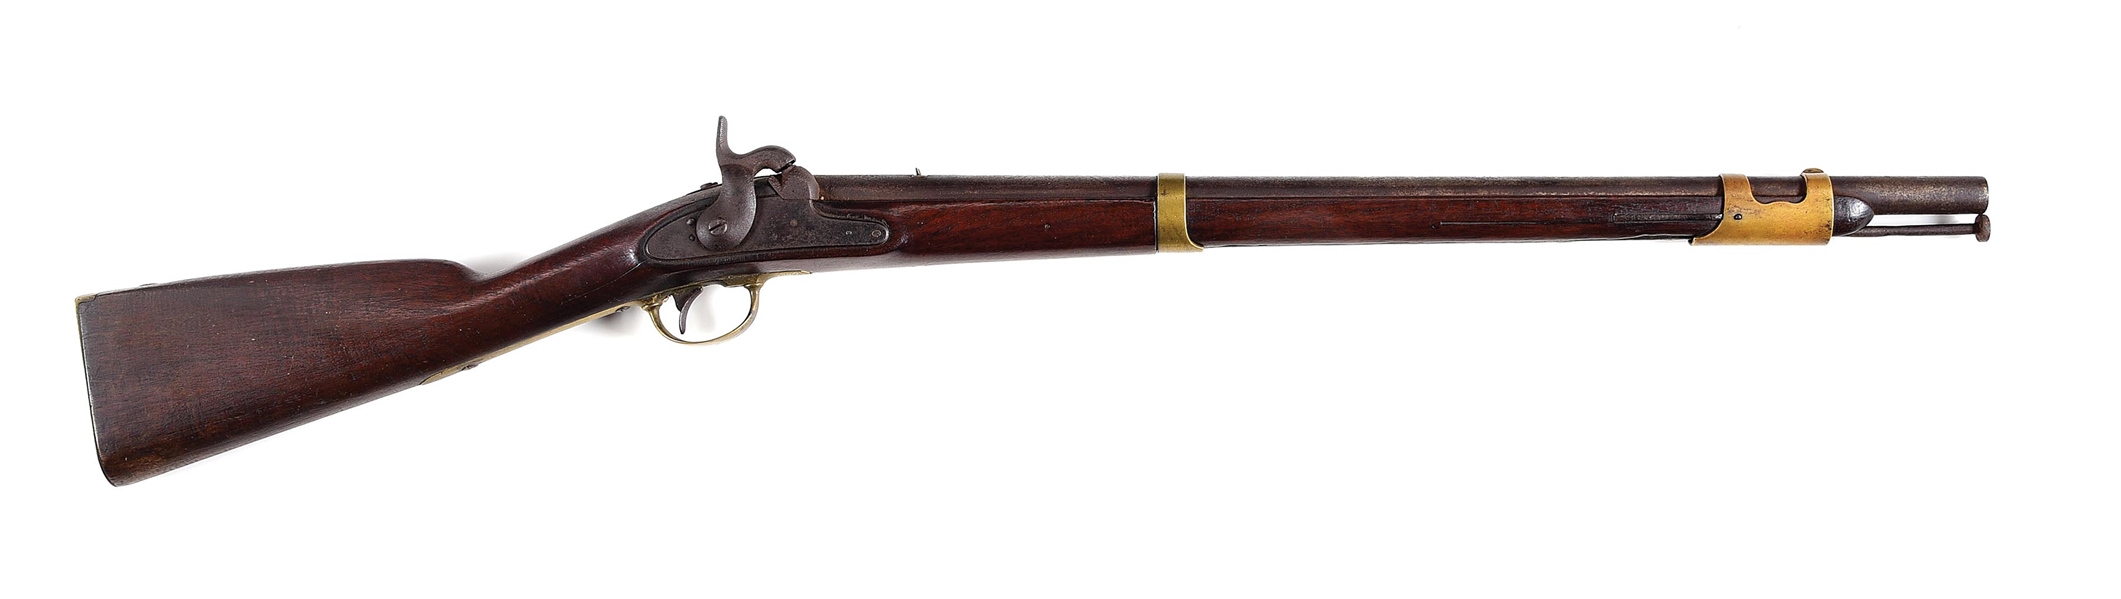 (A) MODIFIED RIFLED AND SIGHTED SPRINGFIELD 1847 CAVALRY MUSKETOON